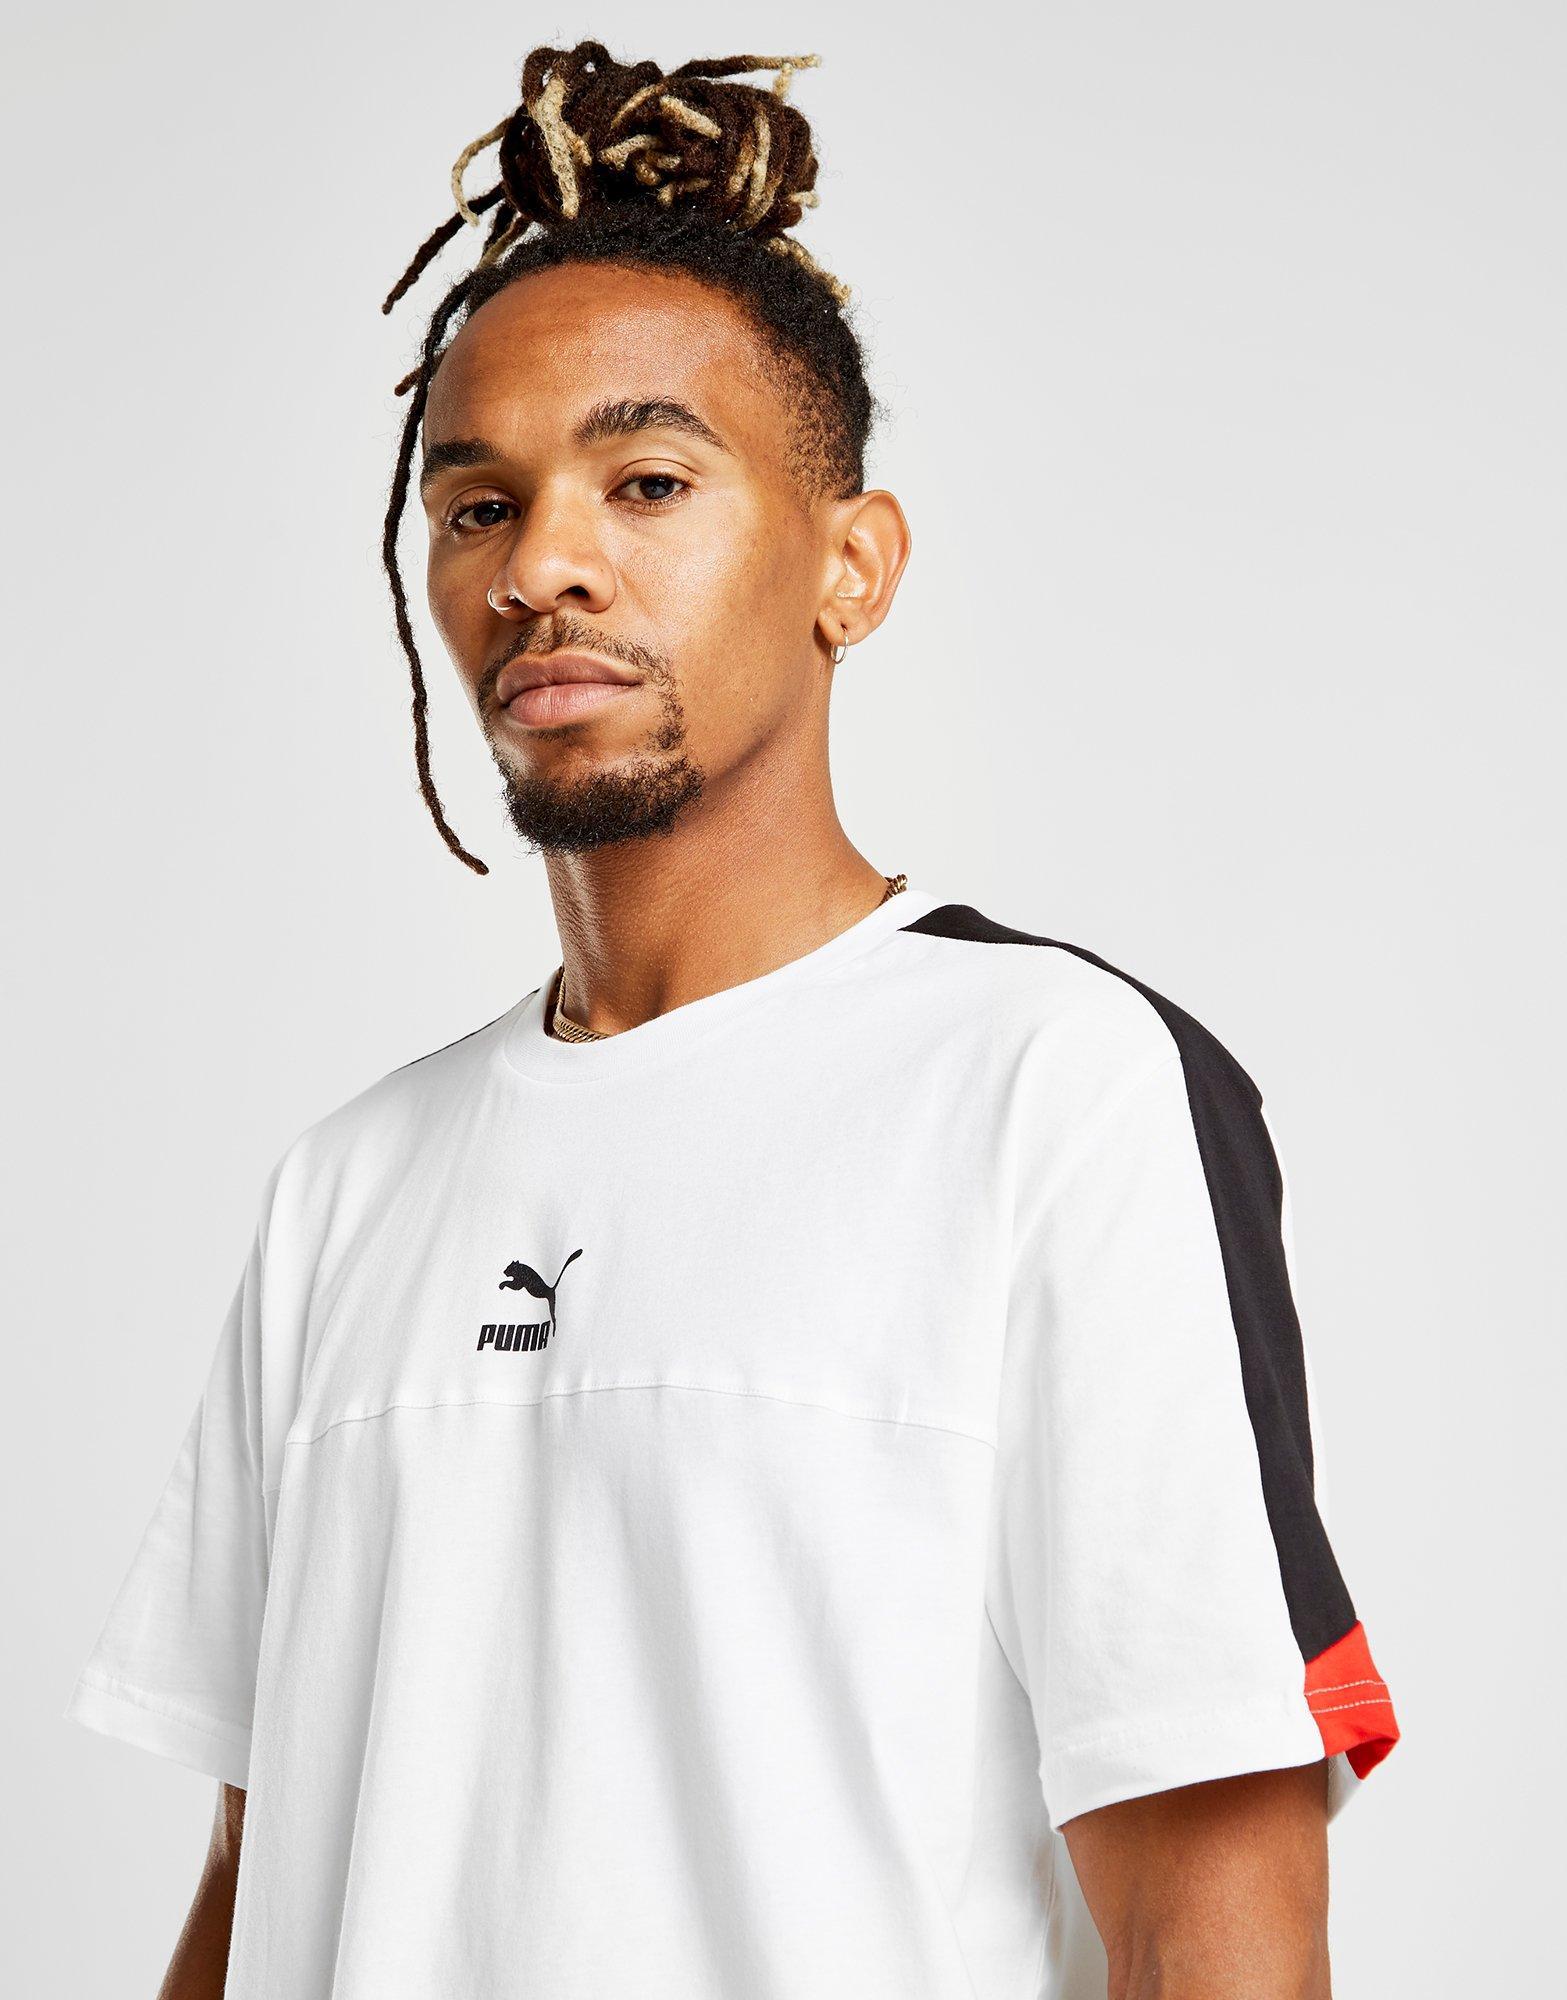 PUMA Cotton Rs T-shirt in White for Men 